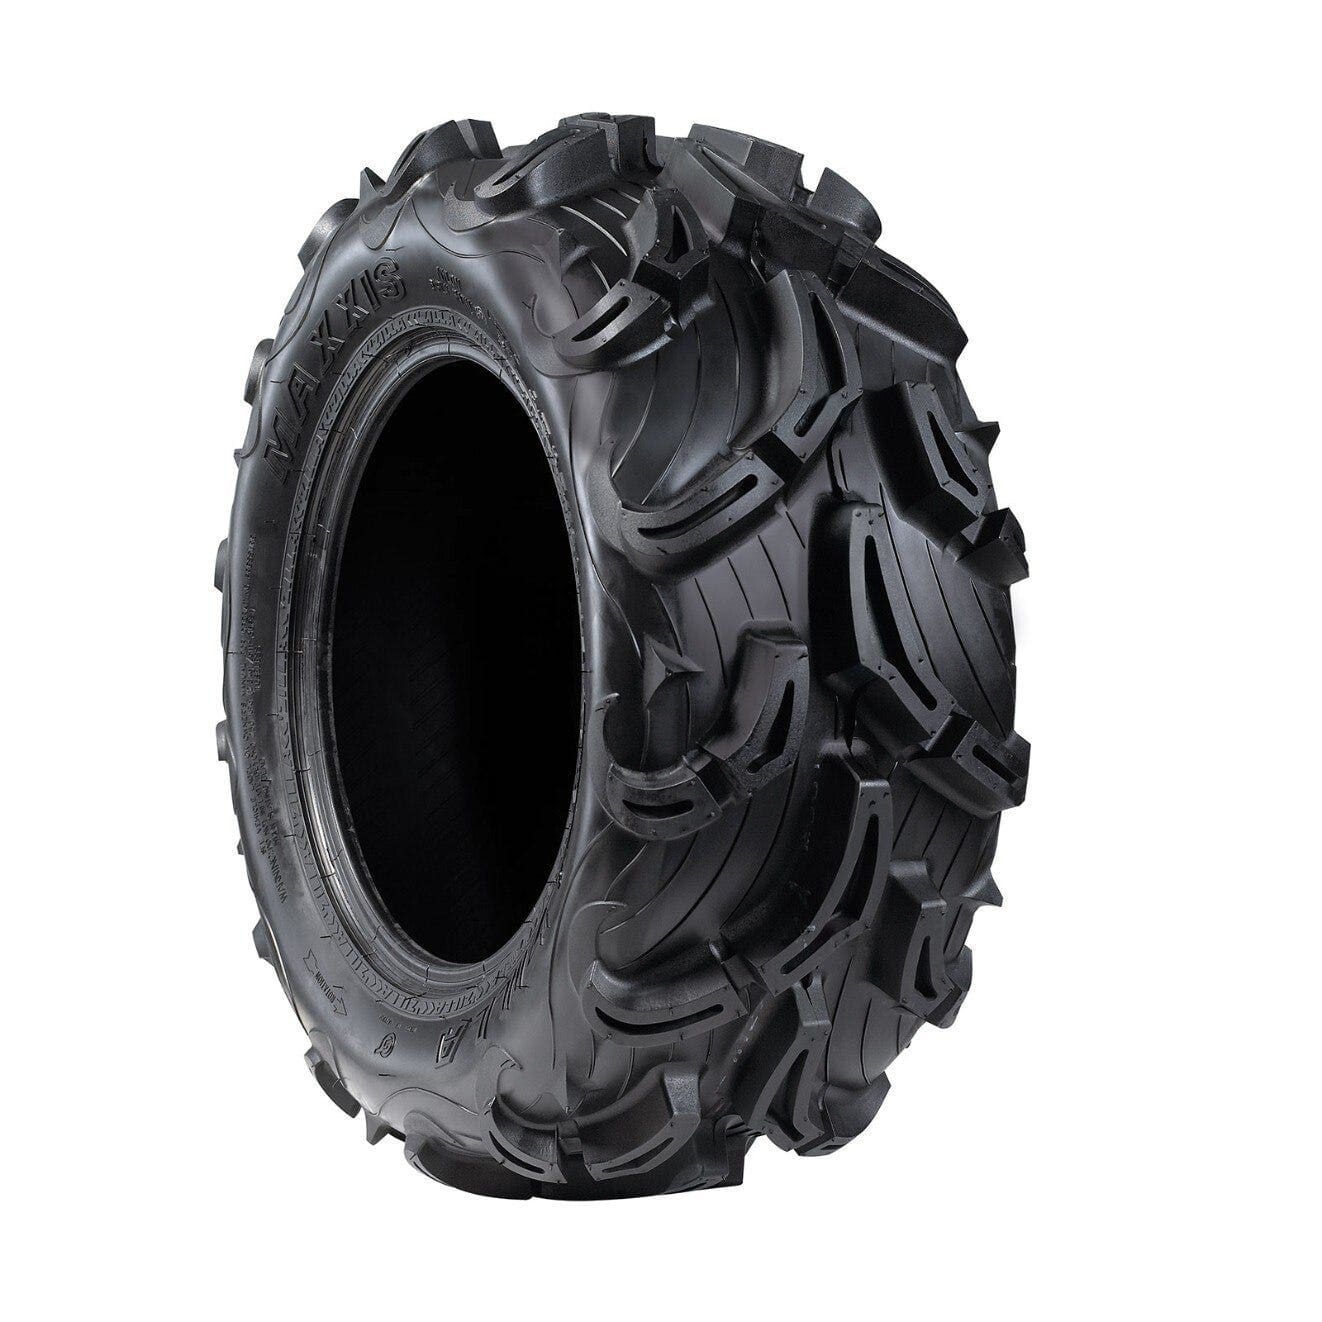 Zilla Tire By Maxxis - Rear